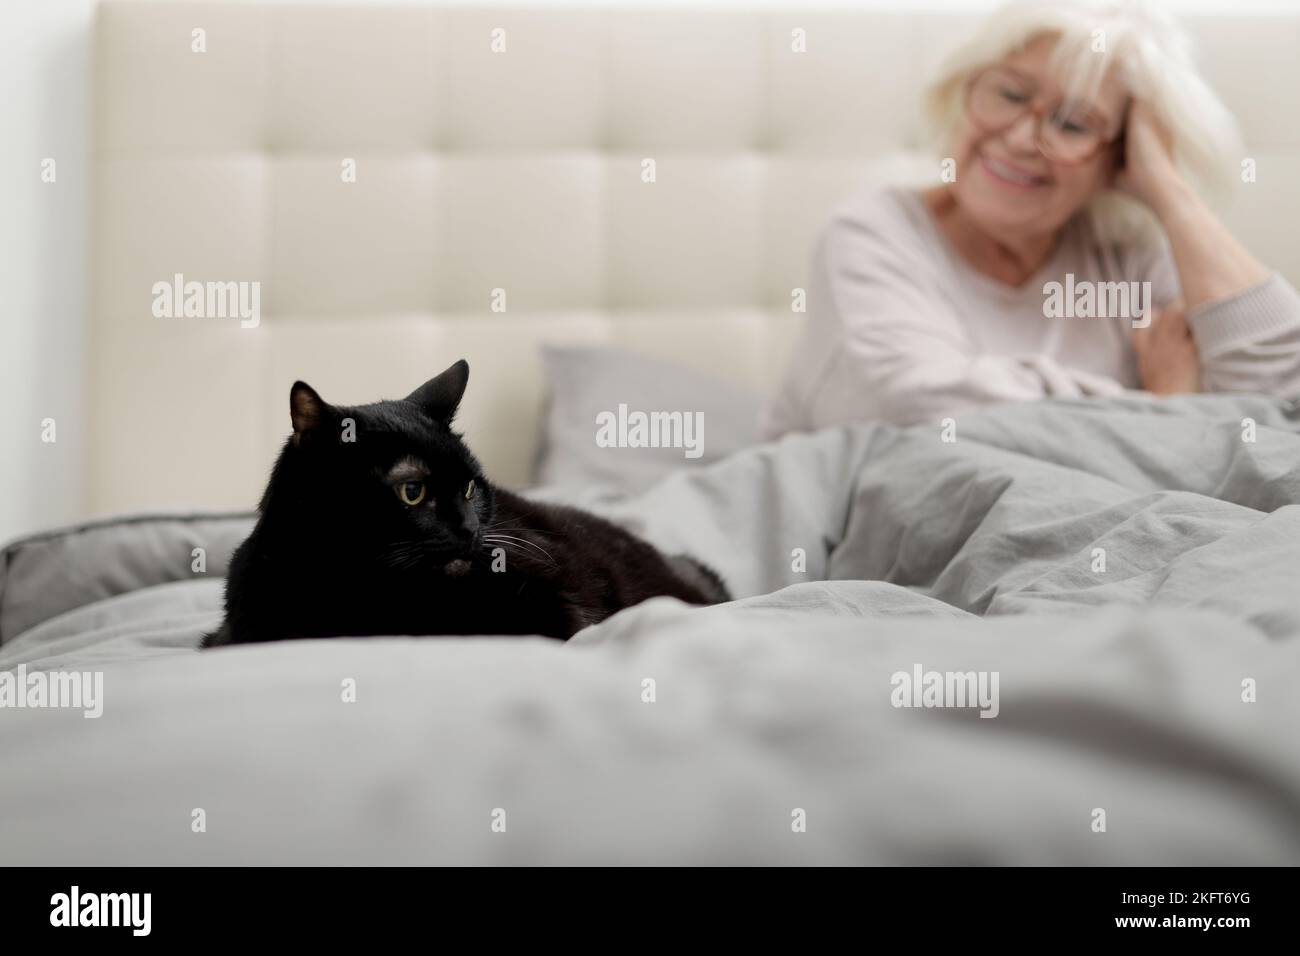 Cheerful senior lady with white hair sitting on bed under grey blanket next to a adorable black cat Stock Photo